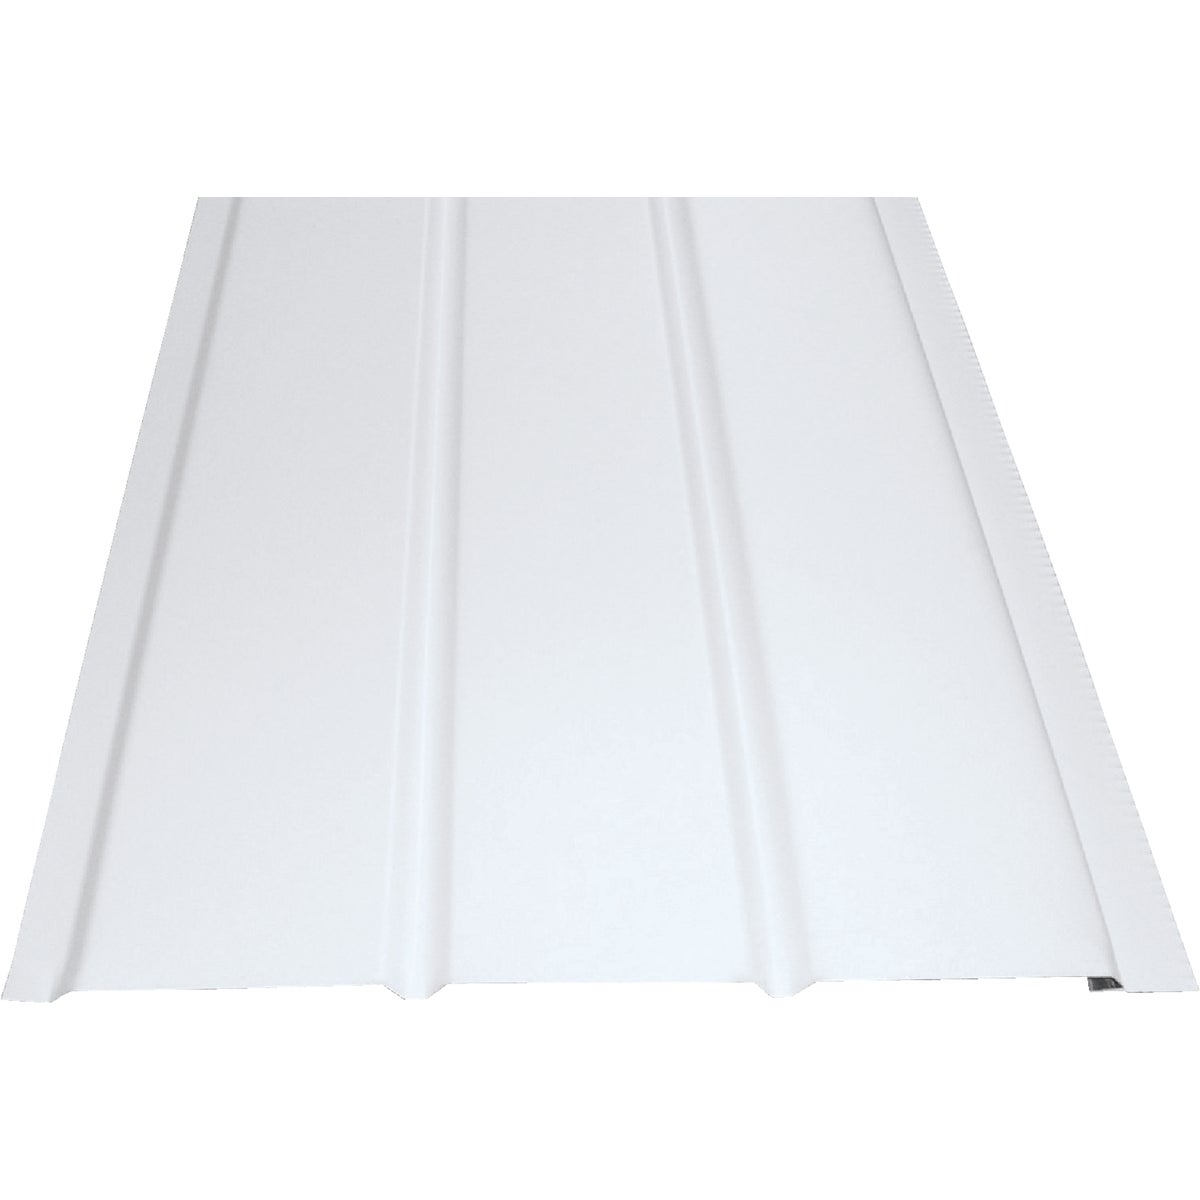 Item 116661, Painted aluminum soffit protects the wood structure of the roof overhang 